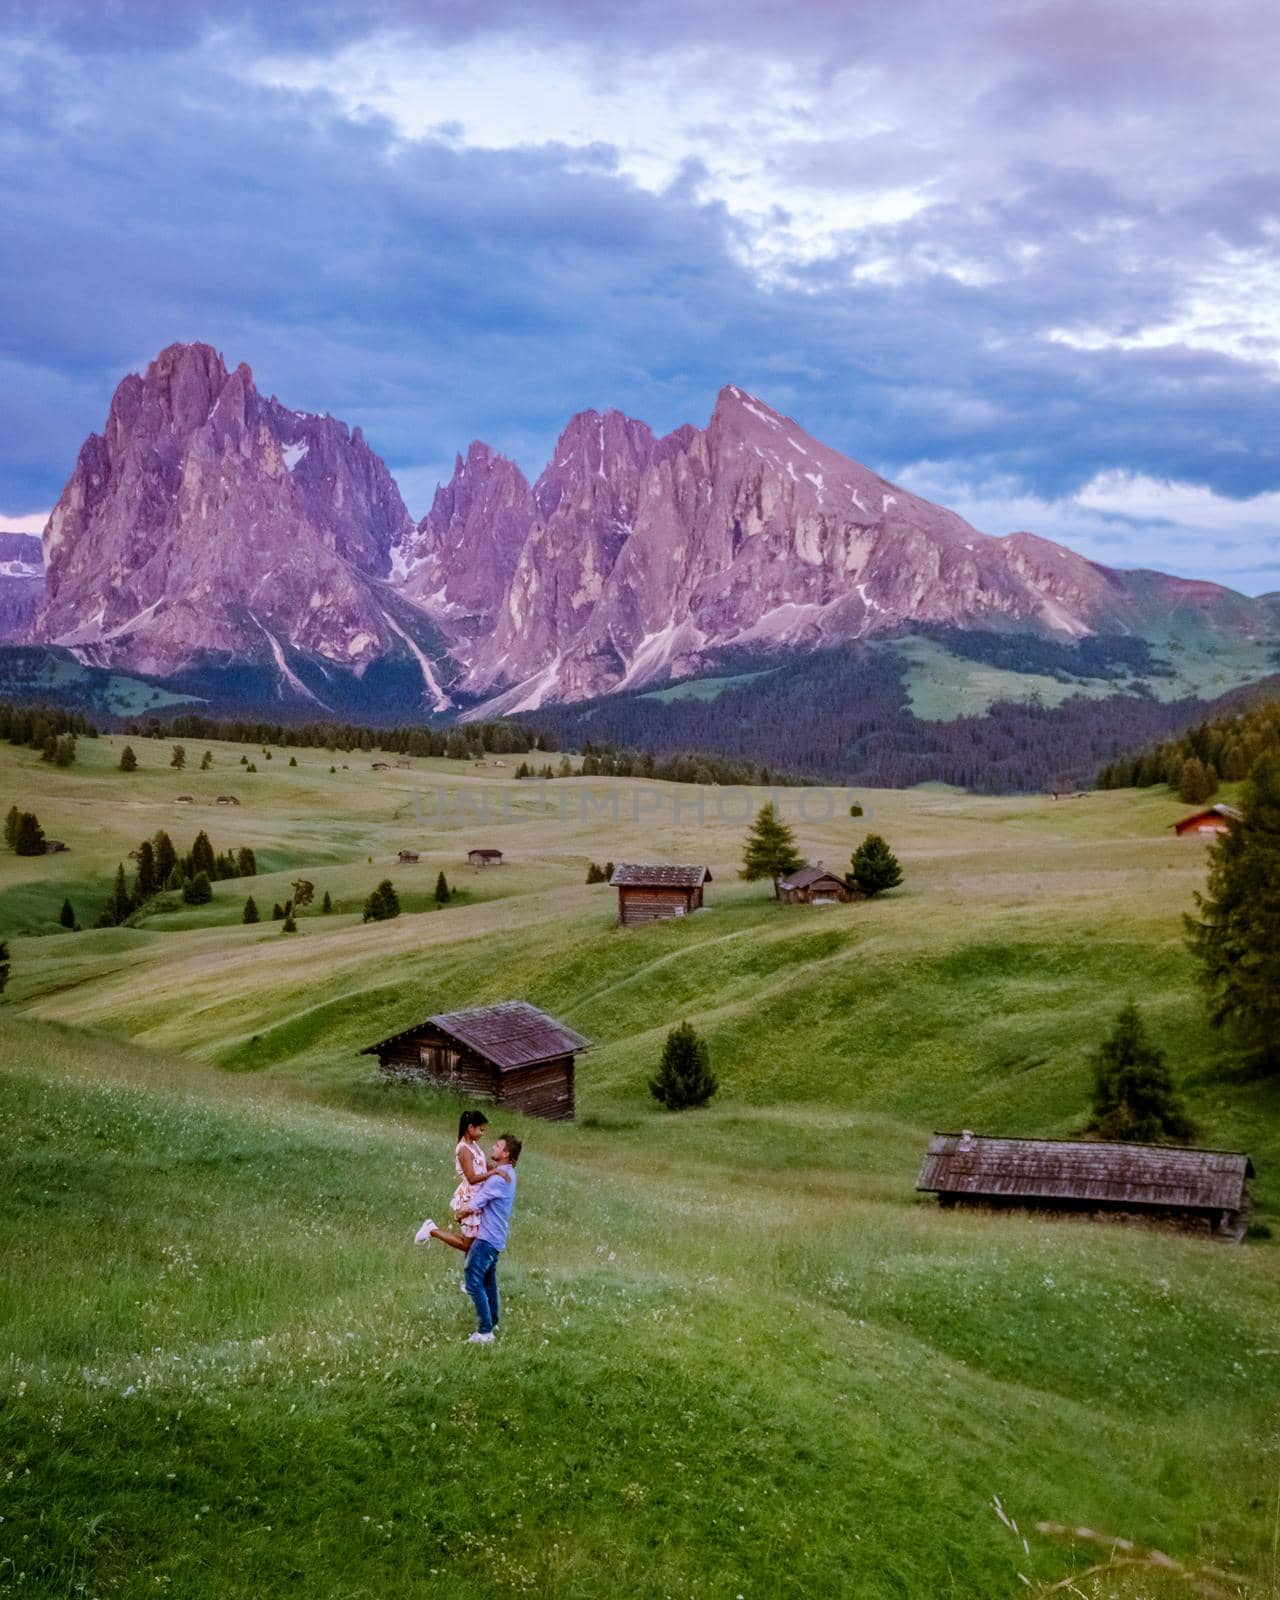 couple men and woman on vacation in the Dolomites Italy,Alpe di Siusi - Seiser Alm with Sassolungo - Langkofel mountain group in background at sunset. Yellow spring flowers and wooden chalets in Dolomites, Trentino Alto Adige, South Tyrol, Italy, Europe by fokkebok